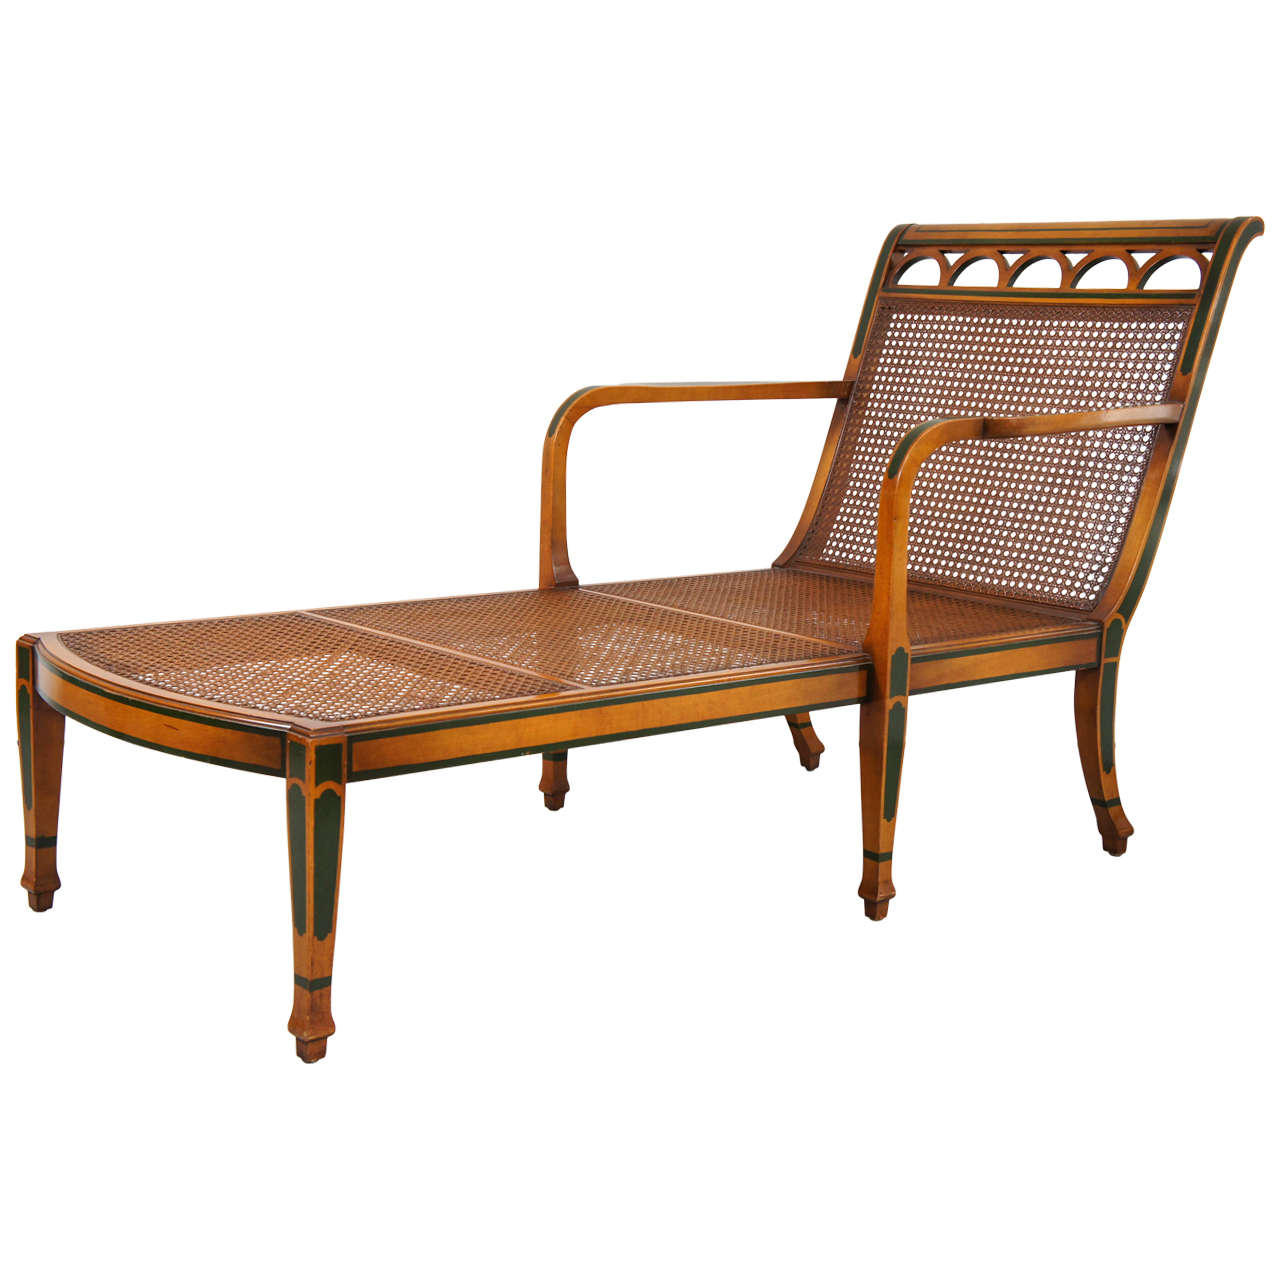 1940's Decorated Satinwood and Caned Chaise Lounge For Sale